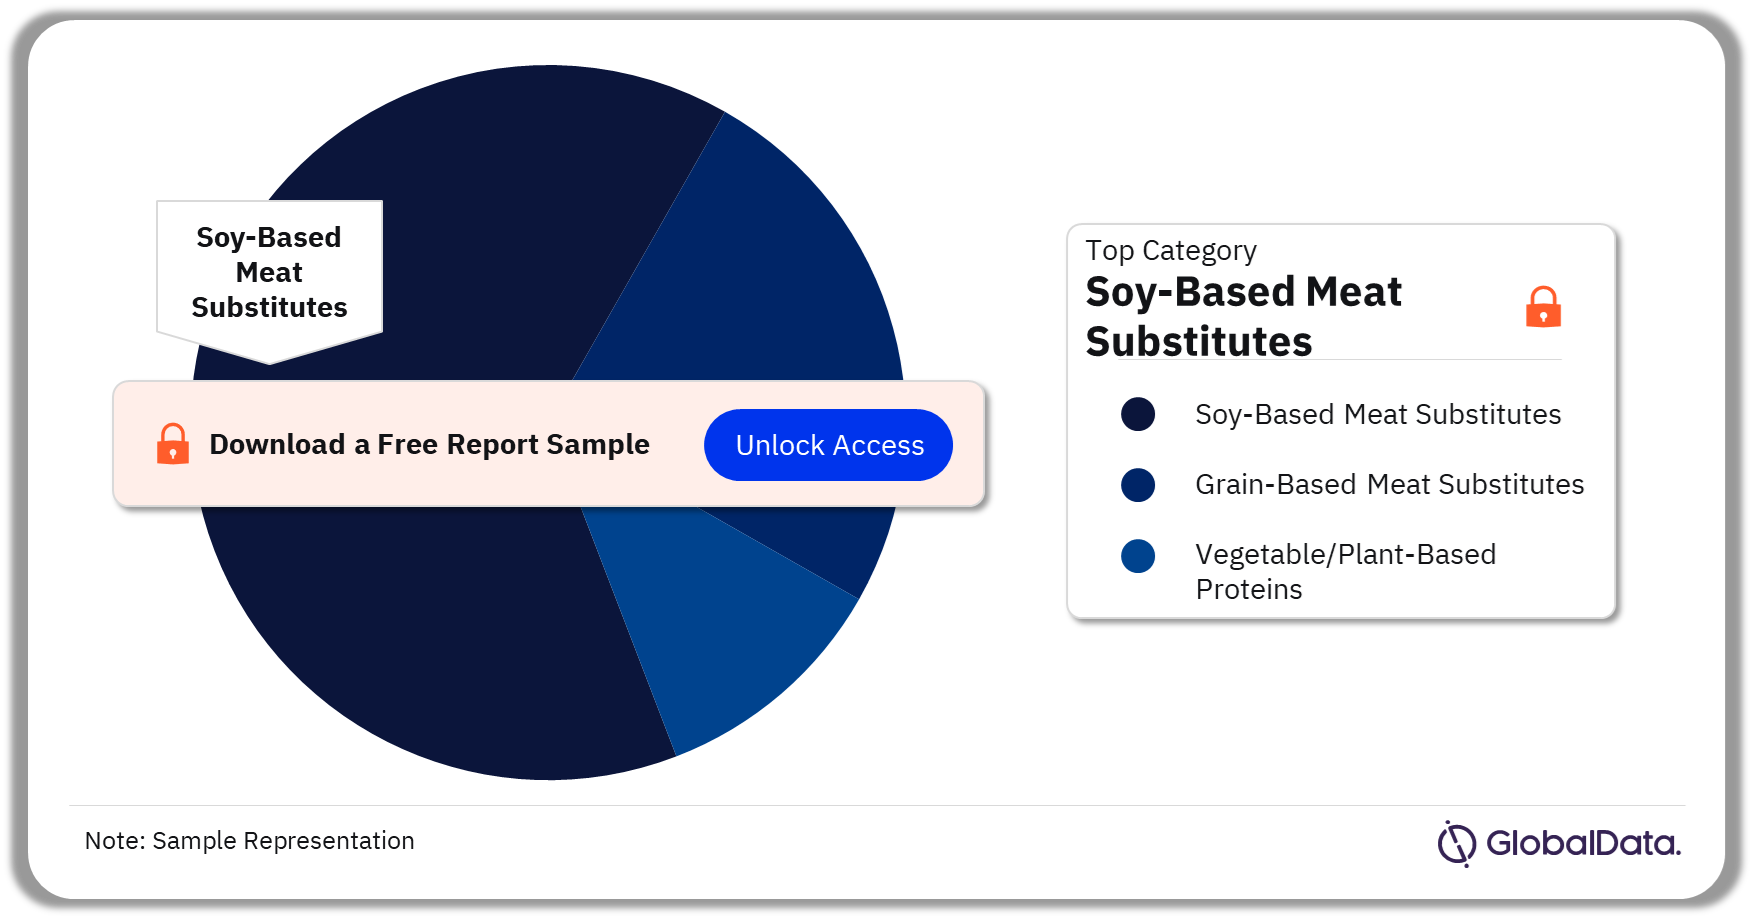 Saudi Arabia Meat Substitutes Market, by Categories, 2022 (%)